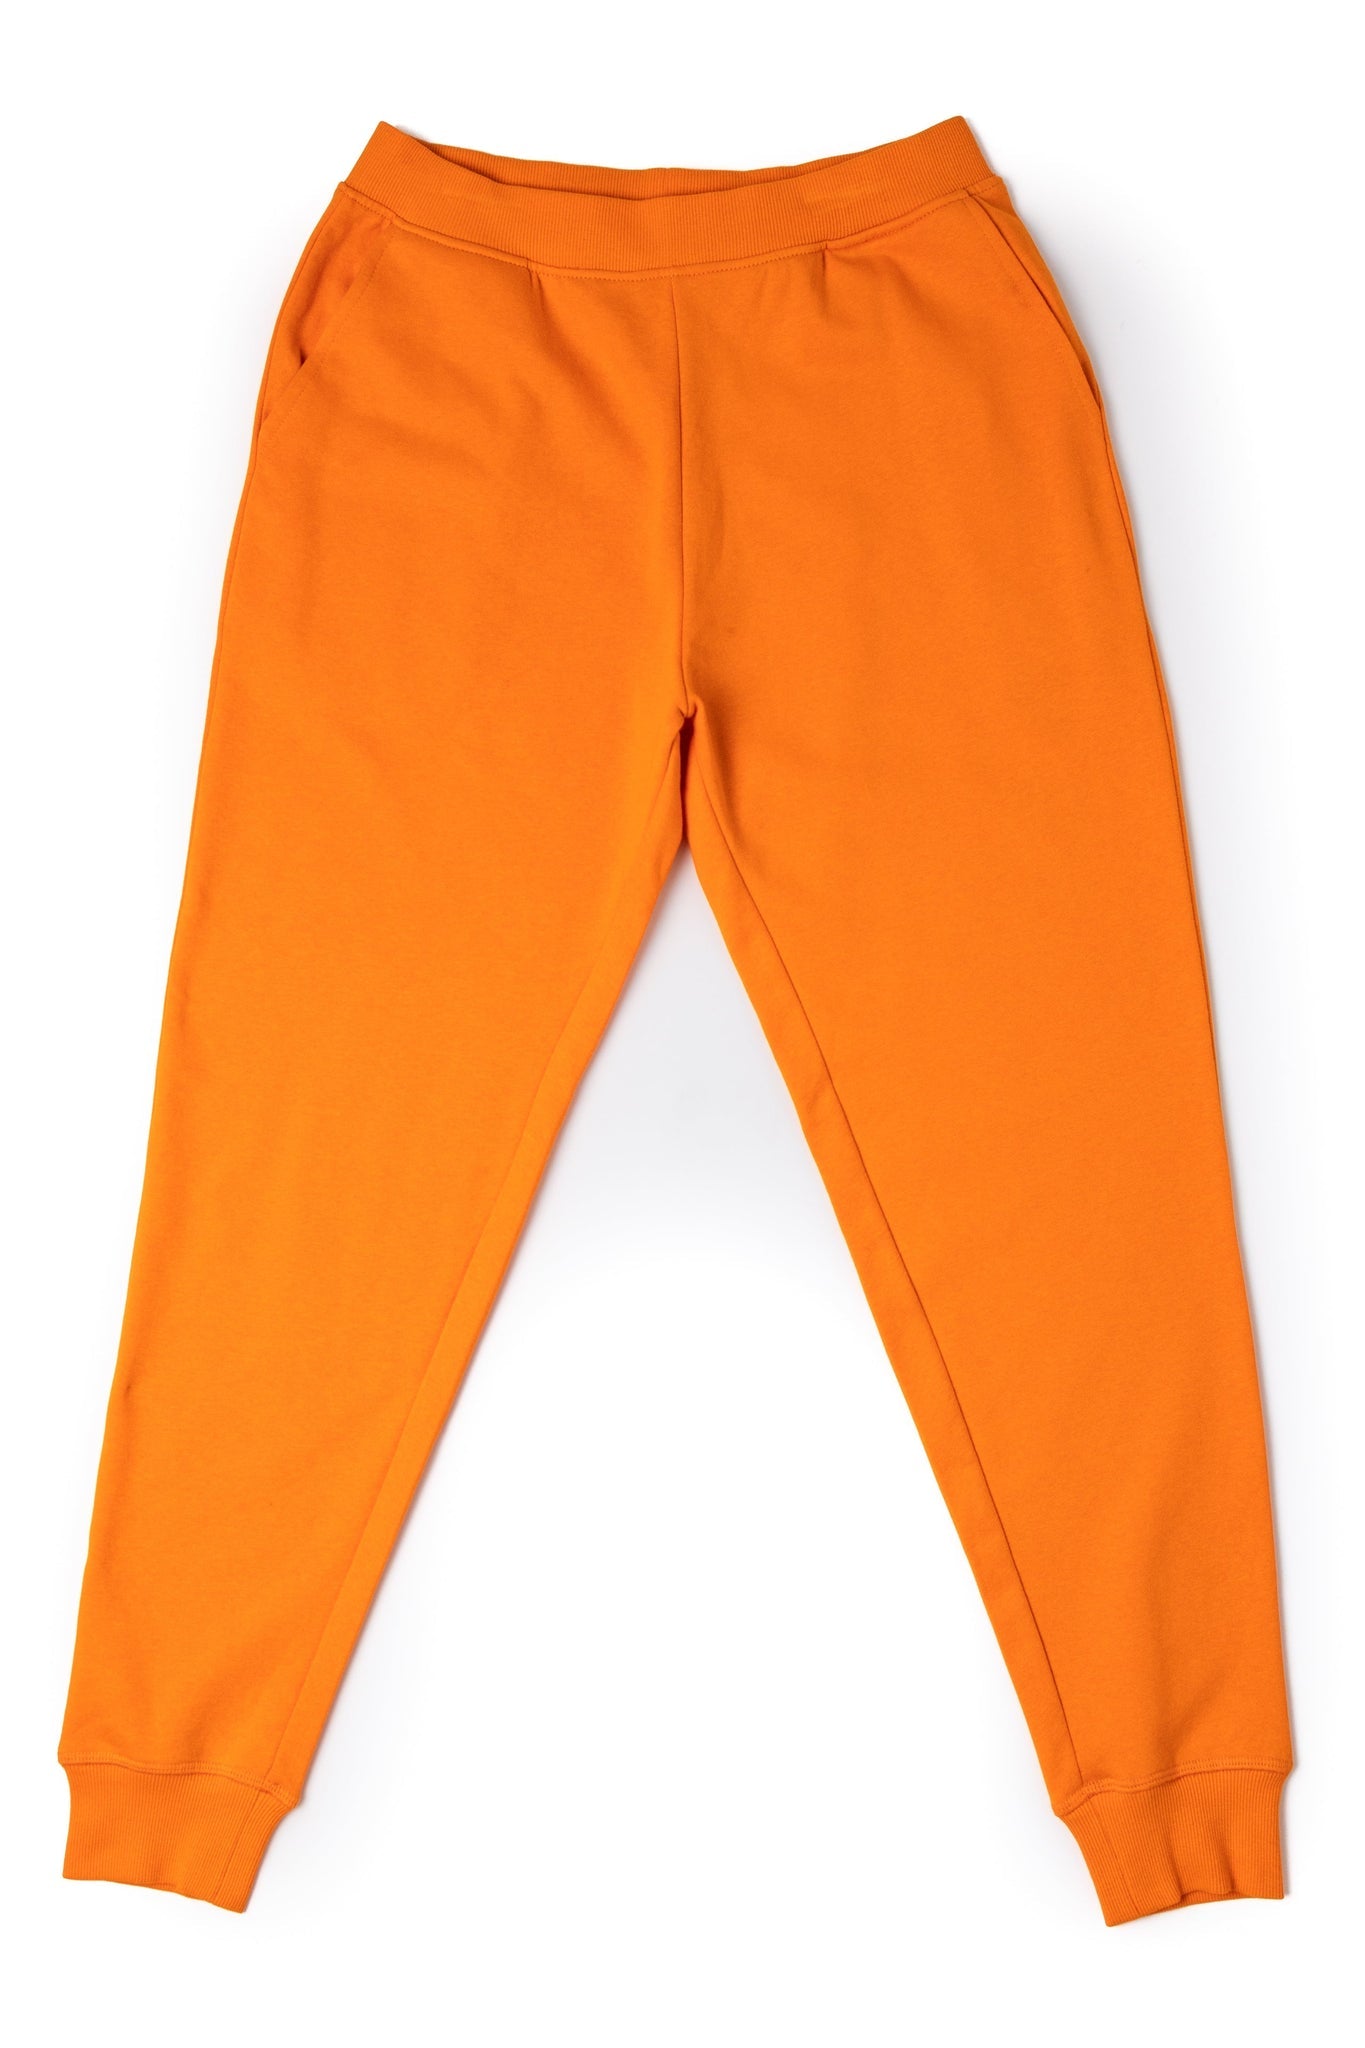 HERO - 5020R Youth Joggers - Orange (Relaxed Fit) XL